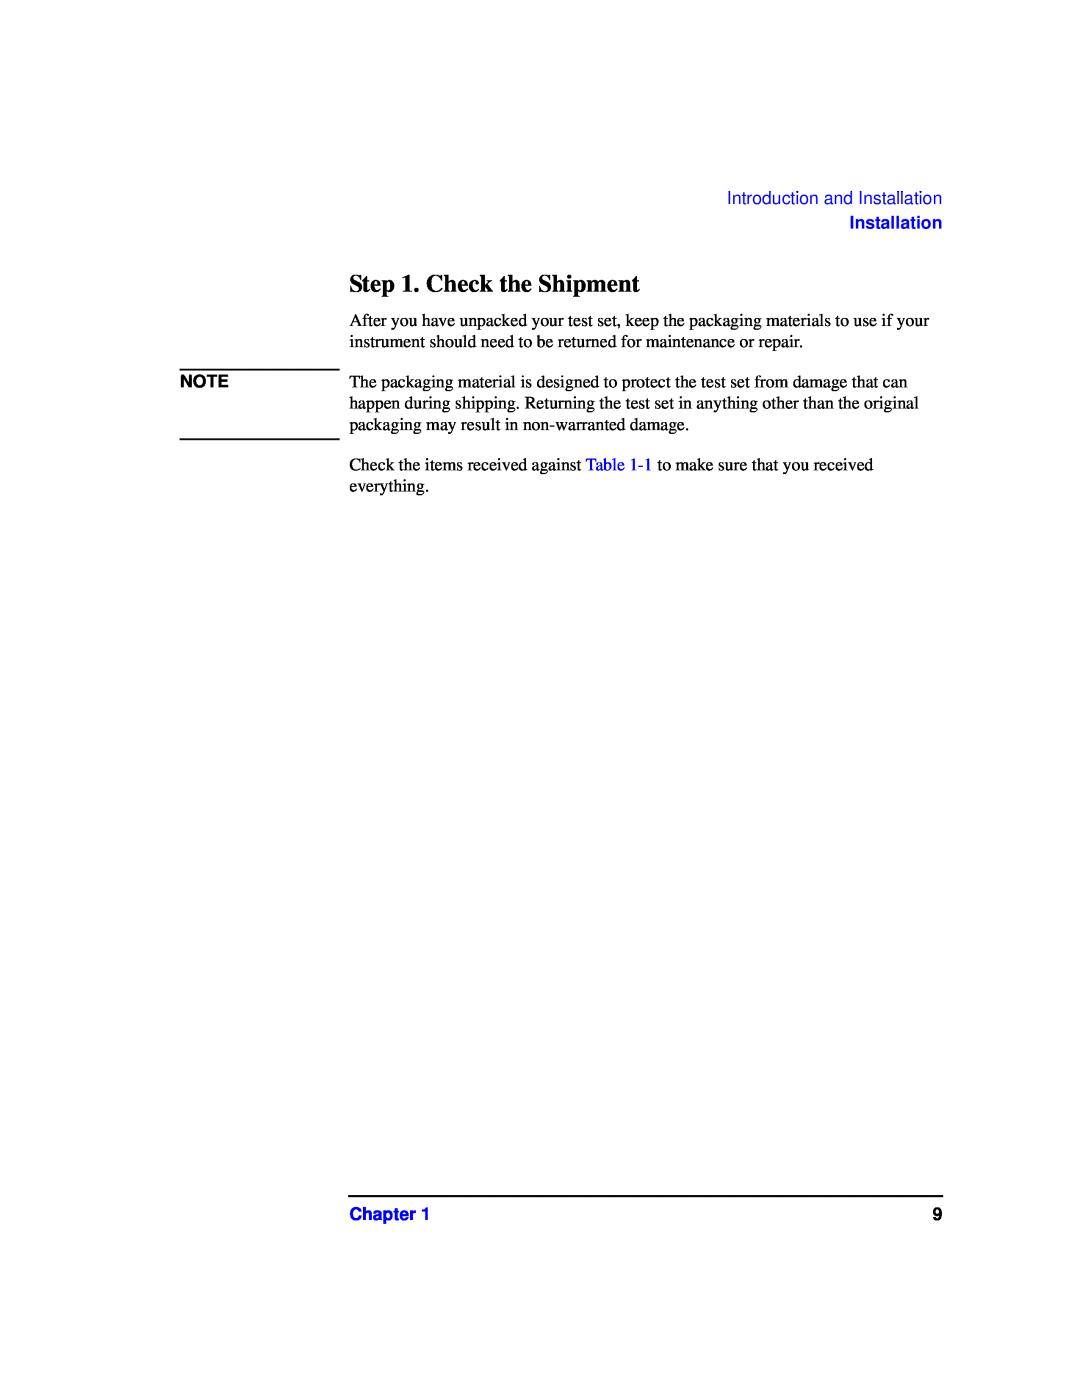 Agilent Technologies 87075C manual Check the Shipment, Introduction and Installation, Chapter 